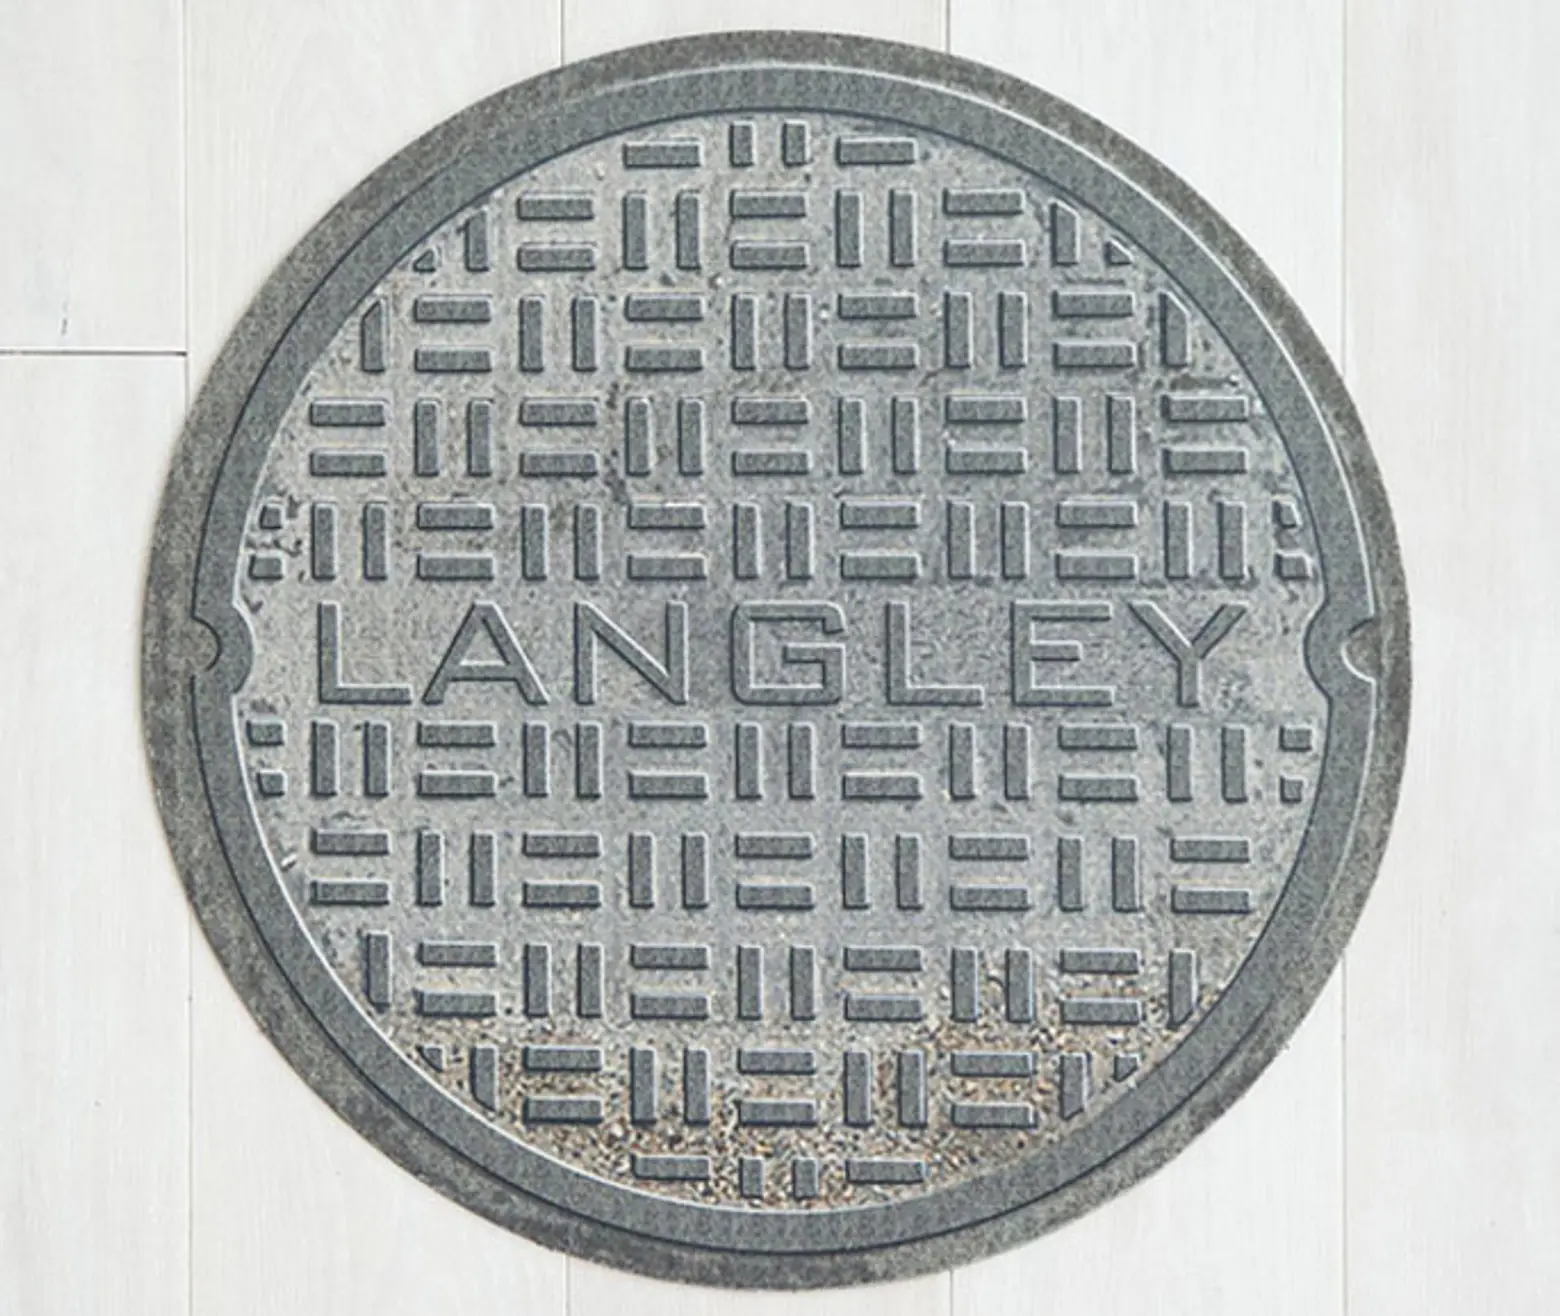 Personalized Manhole Doormat Will Welcome You Home to Your Urban Oasis